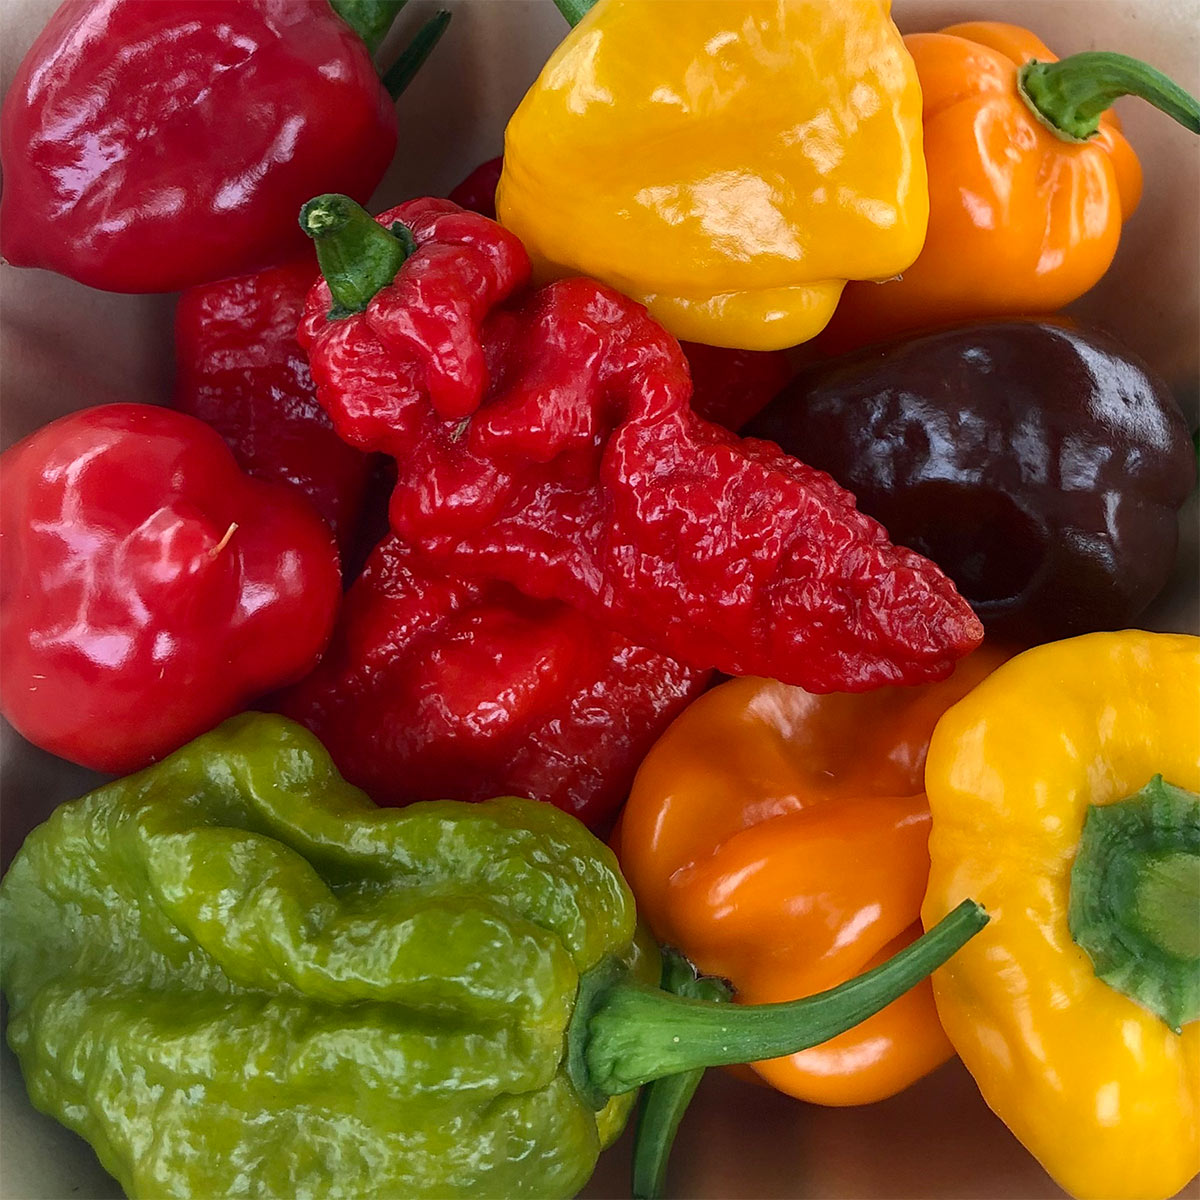 Pepper Joe's hot peppers pack - variety of colorful hot peppers on gray background